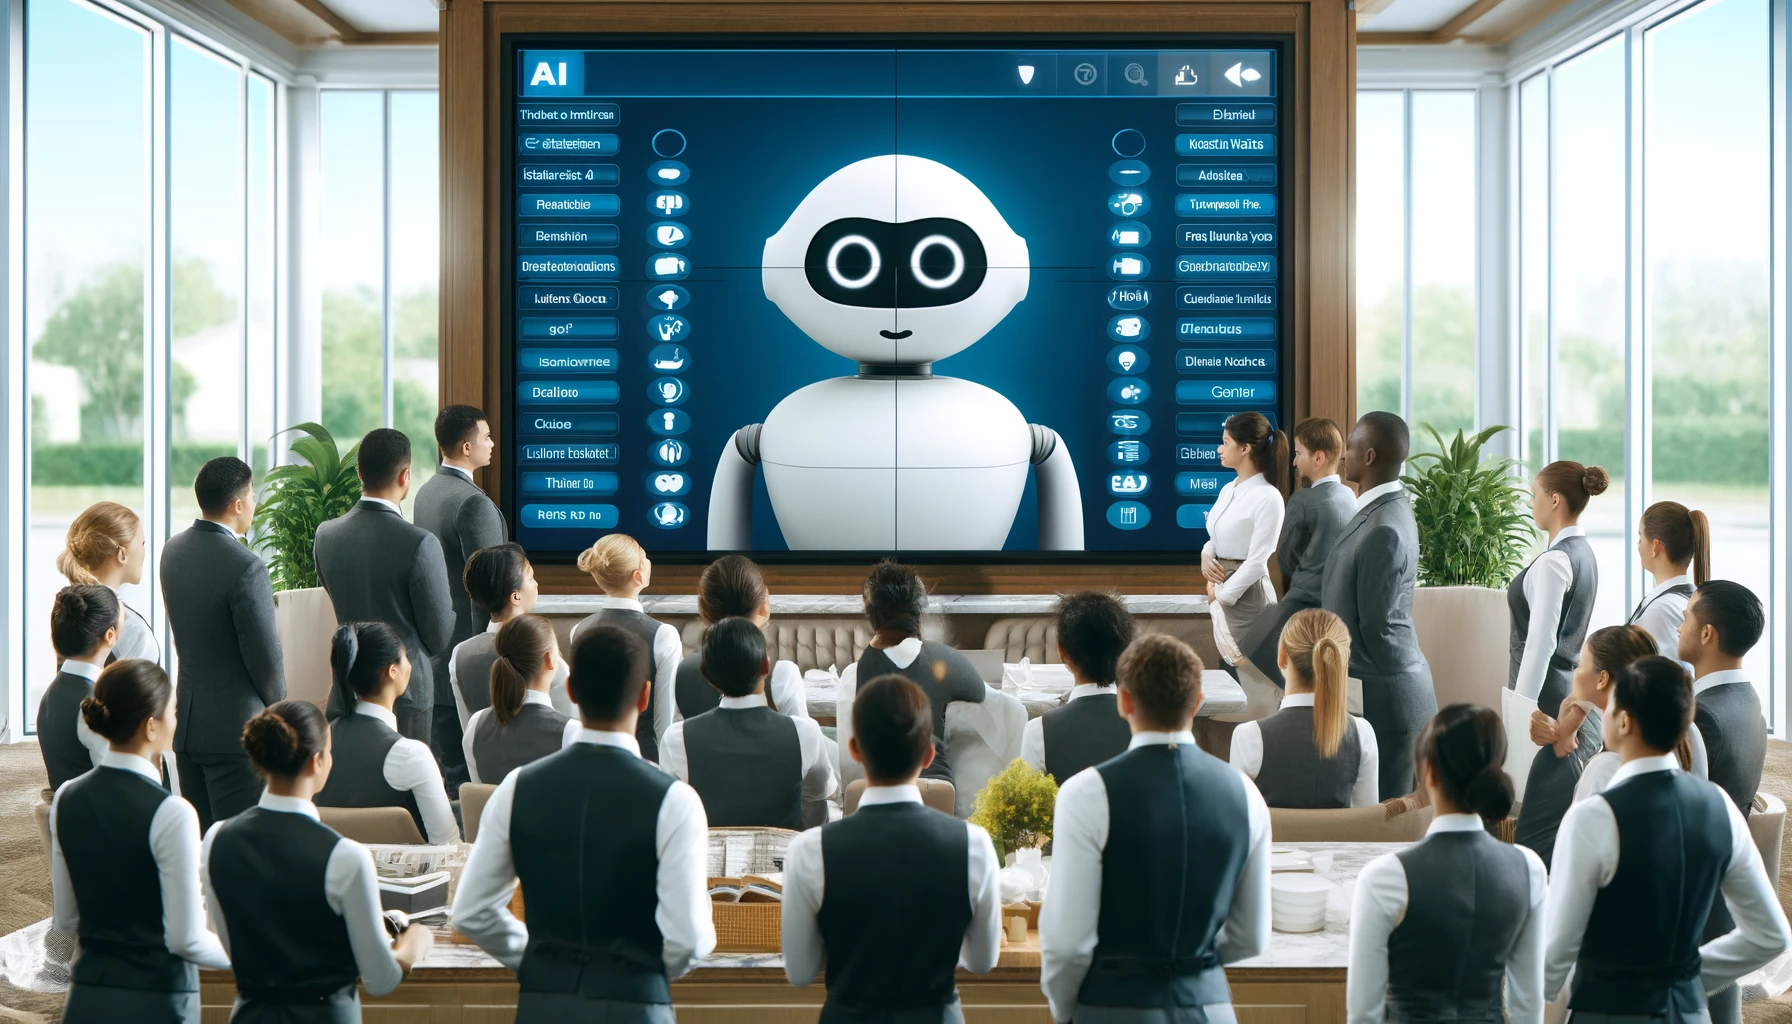 Effective Implementation of AI Chatbots in Hotels Requires Alignment with Brand Values and Comprehensive Staff Training to Enhance Guest Satisfaction